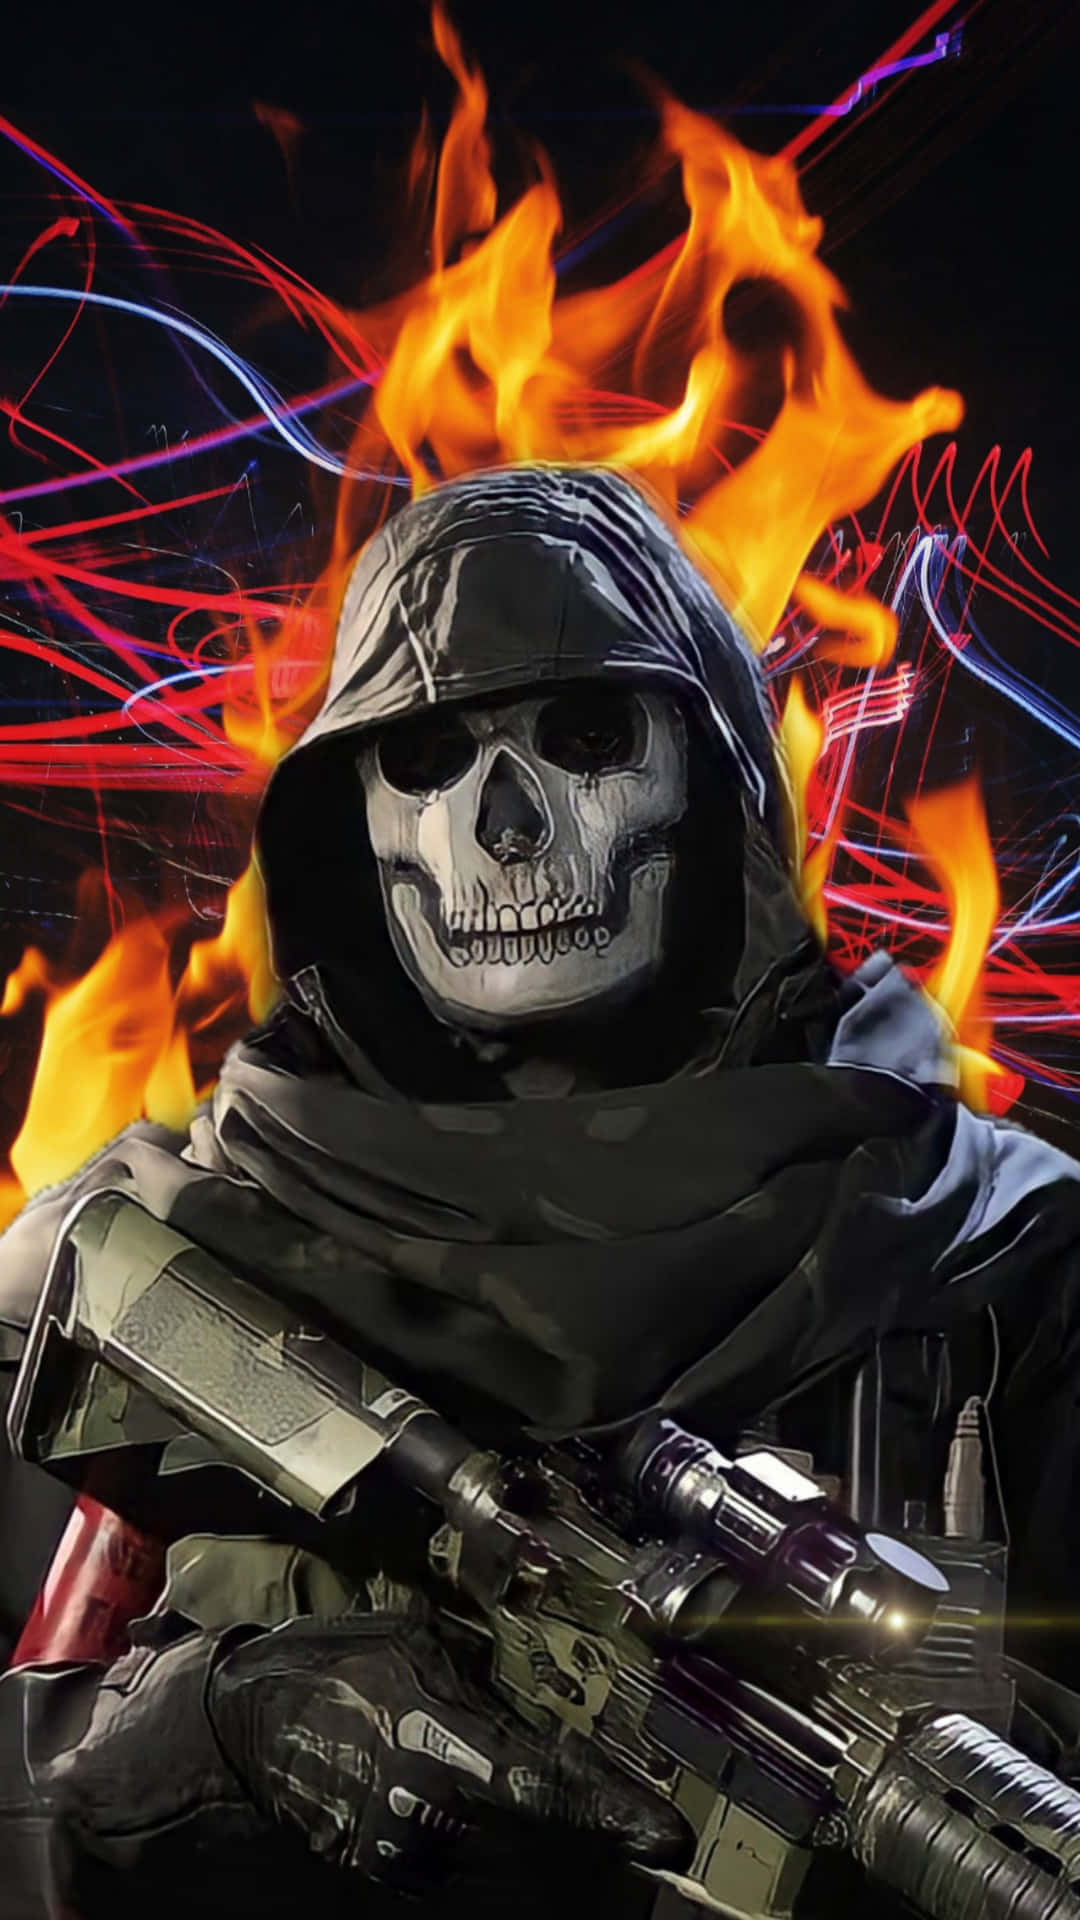 Skull Masked Soldier With Flames P F P Wallpaper